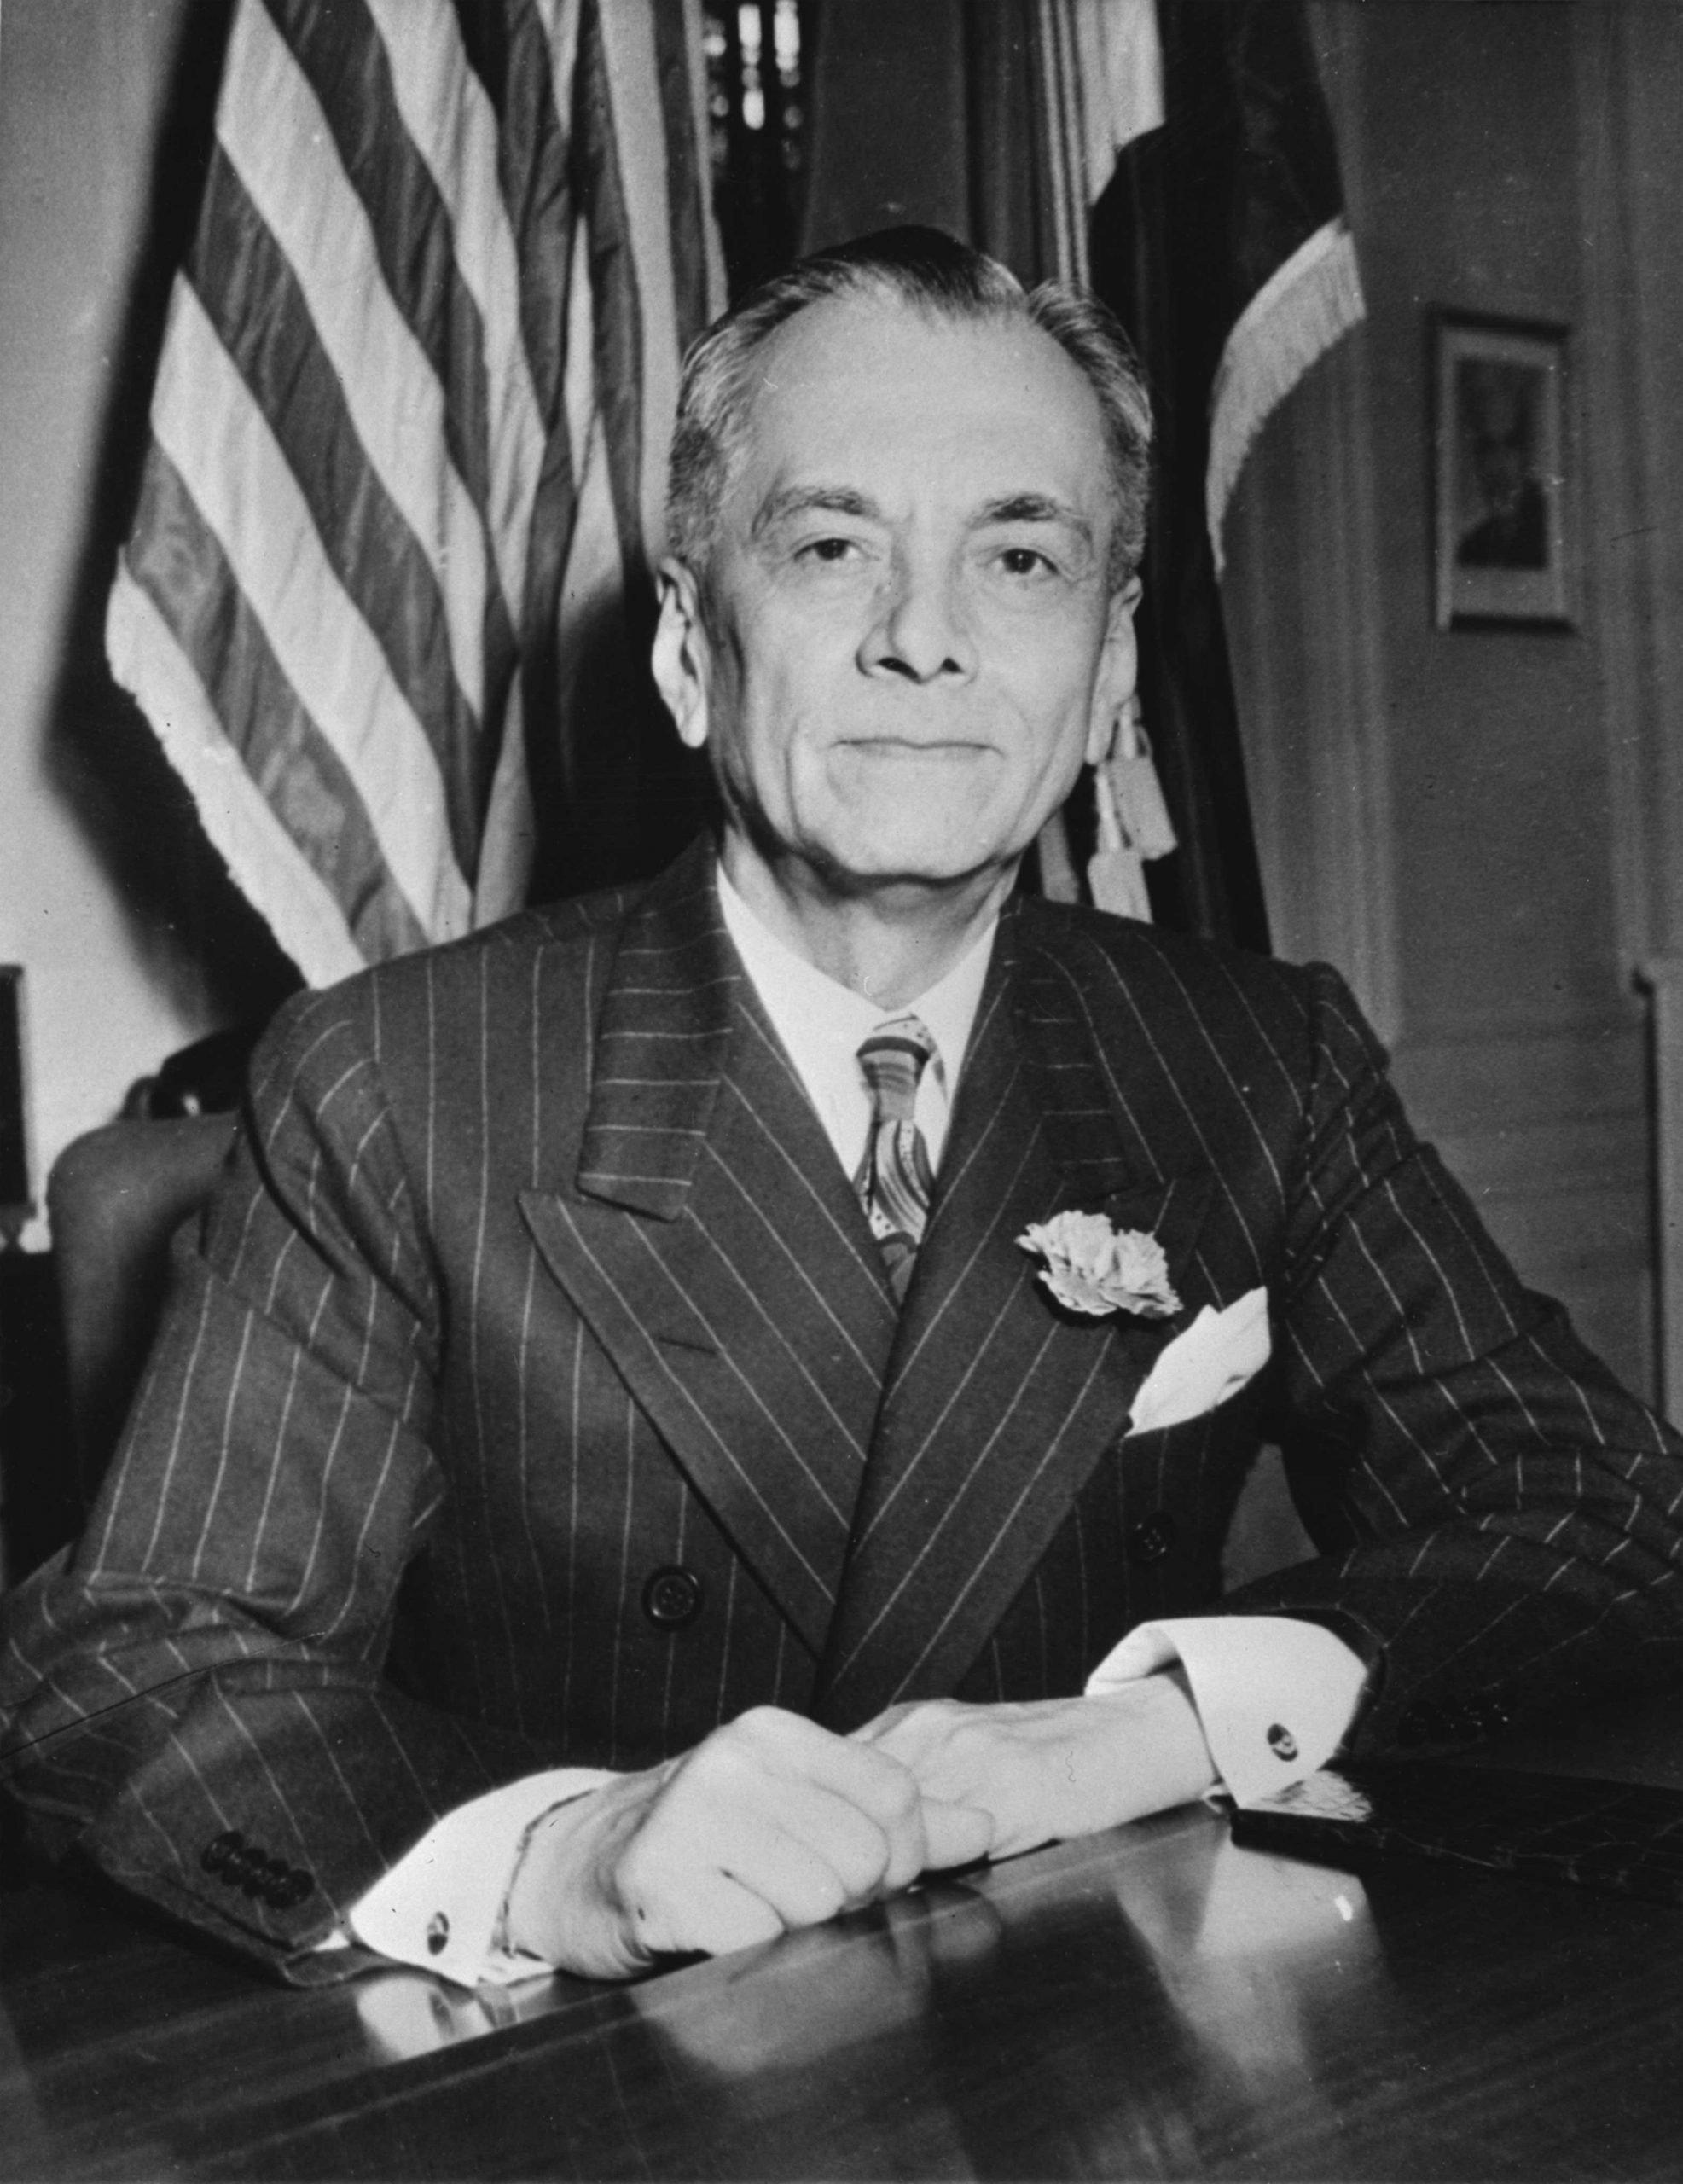 Manuel Quezon, portrait of the President of the Philippines